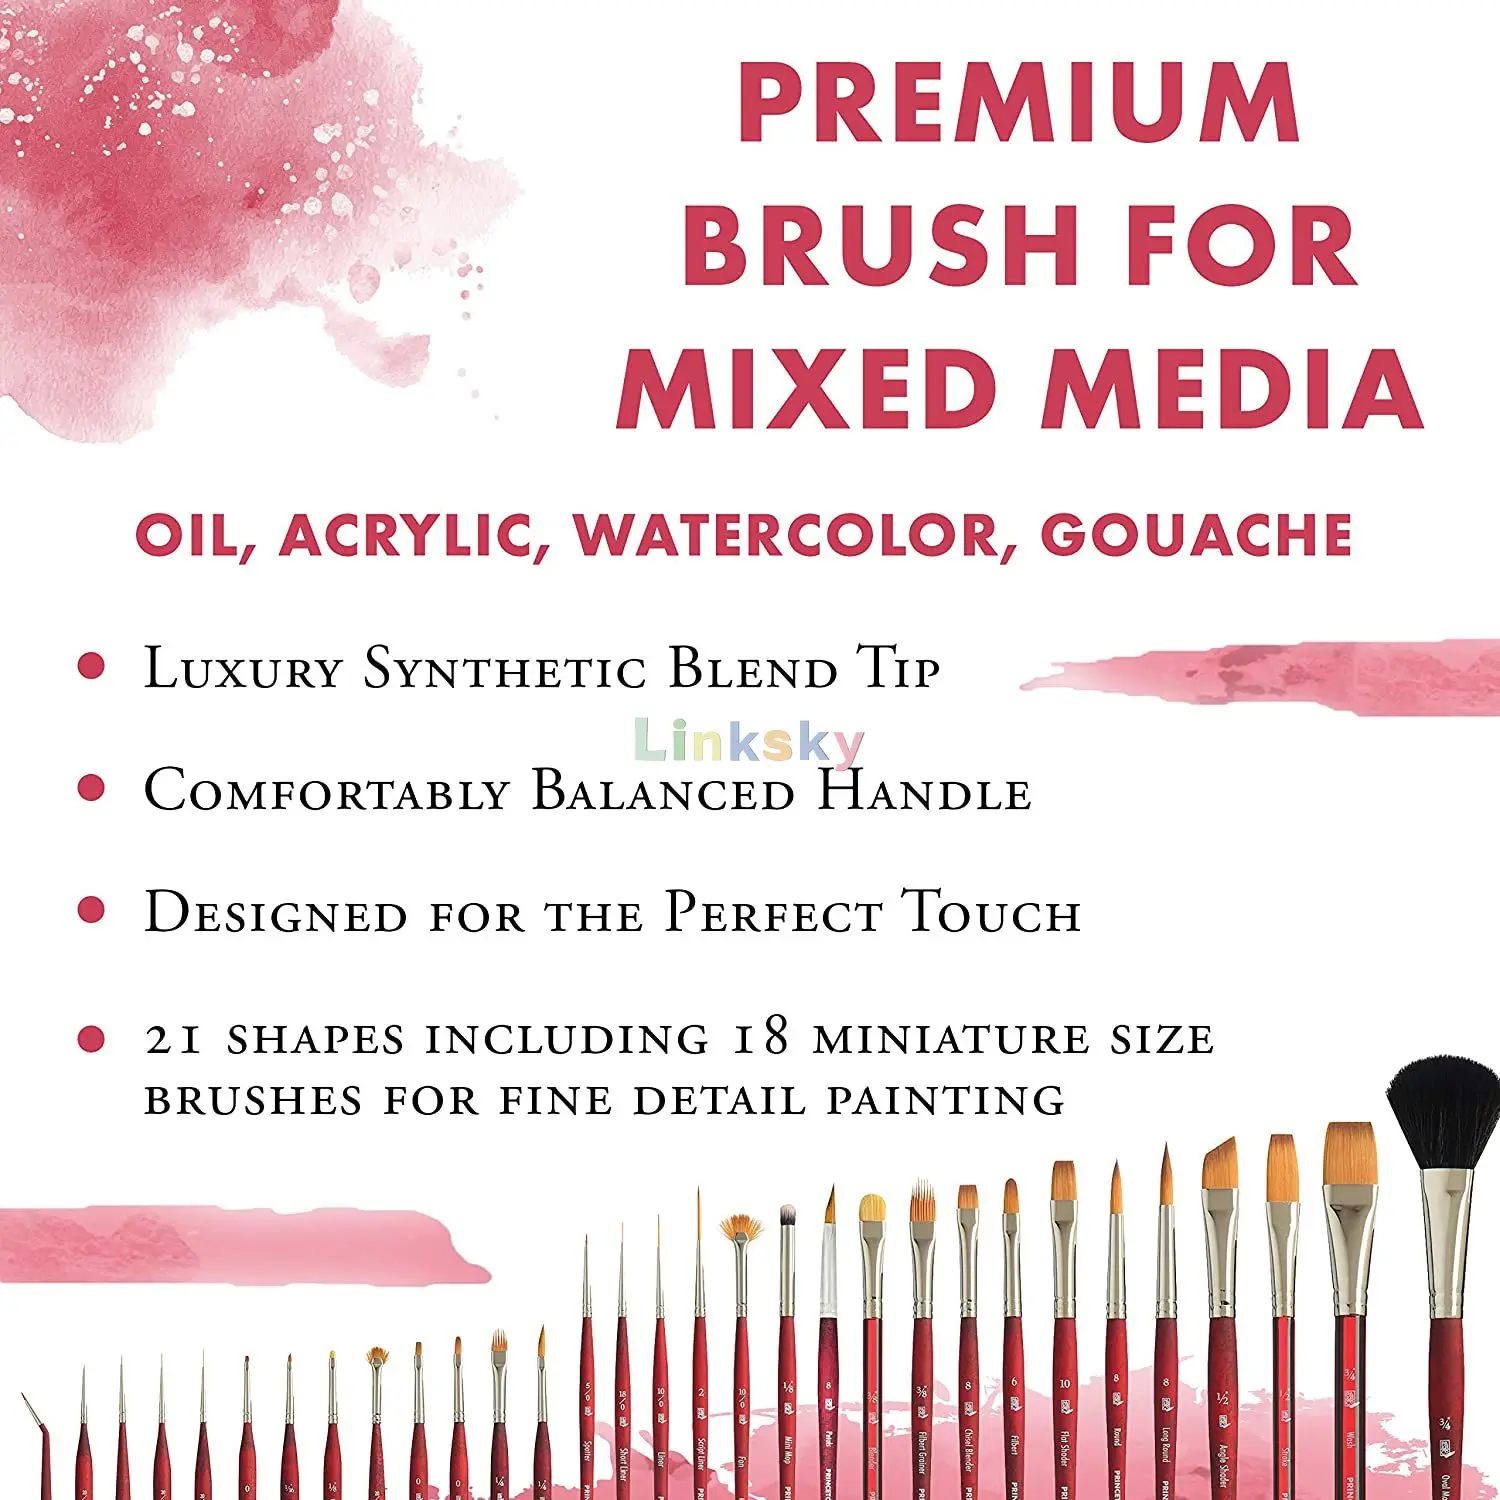 Princeton Mixed-Media Brushes for Acrylic, Oil, Watercolor Series 3950,  Unique Blend of Multiple Synthetic Filaments - AliExpress